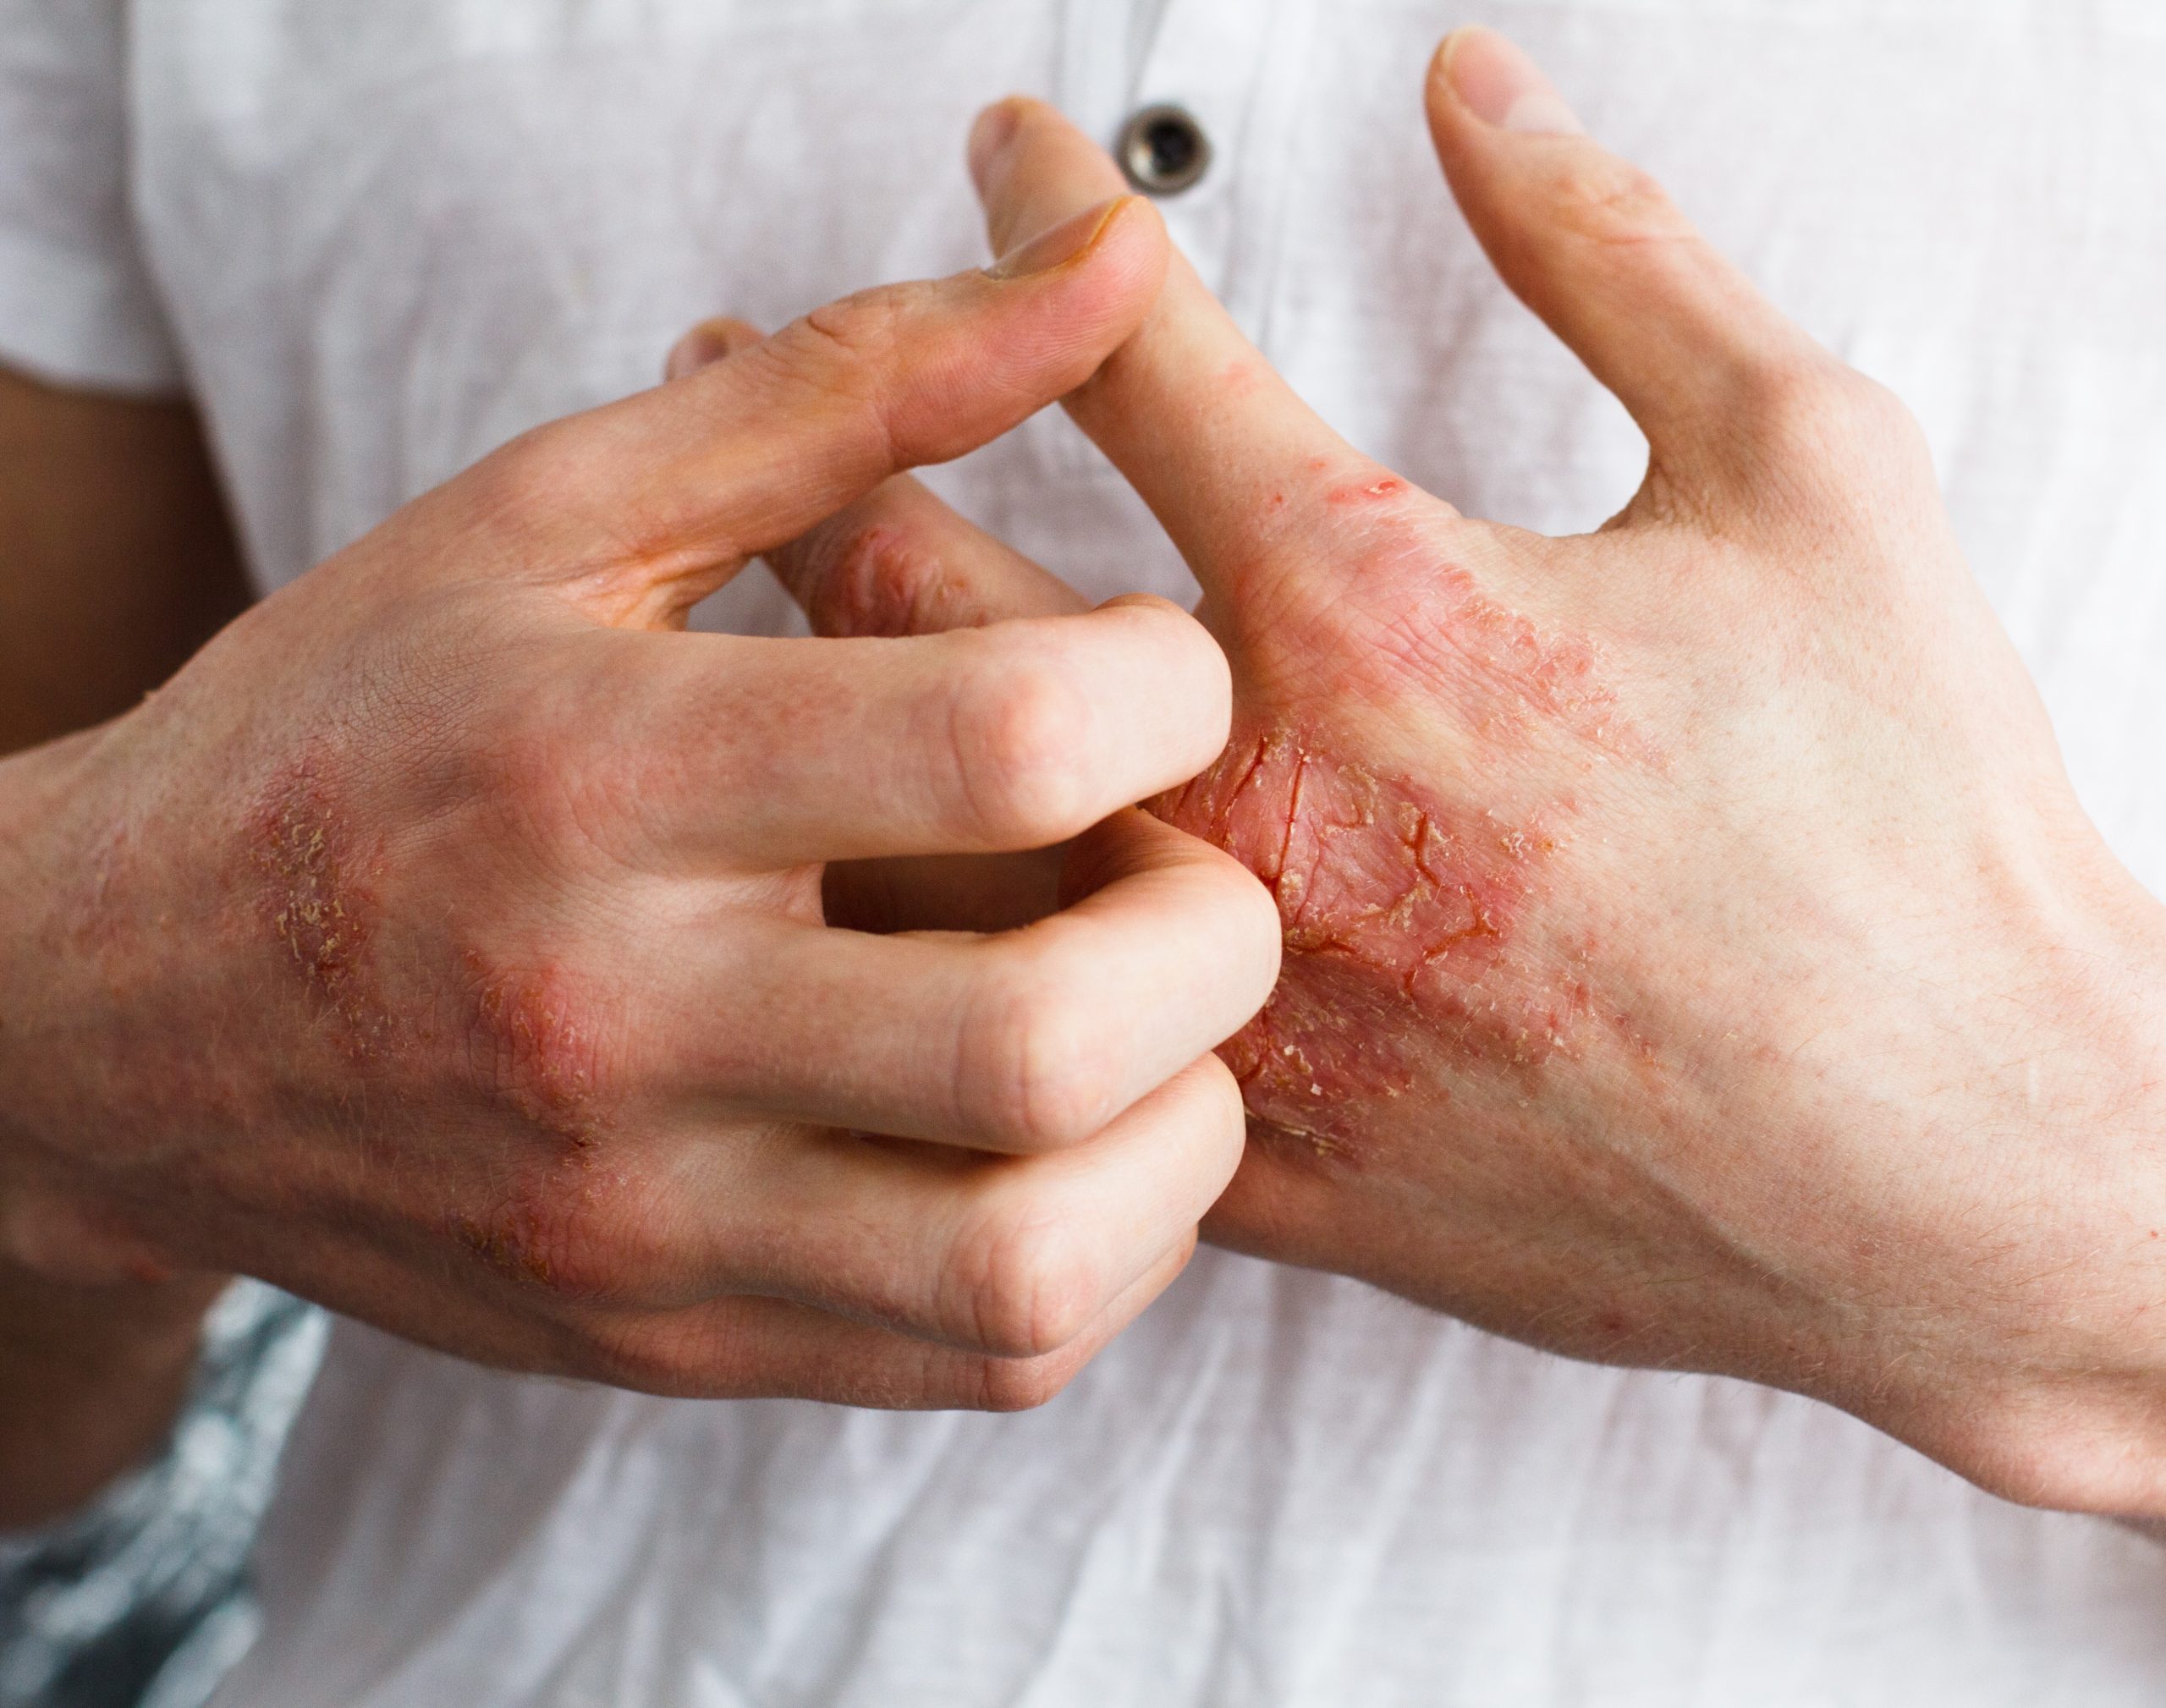 A person with red spots on their skin.